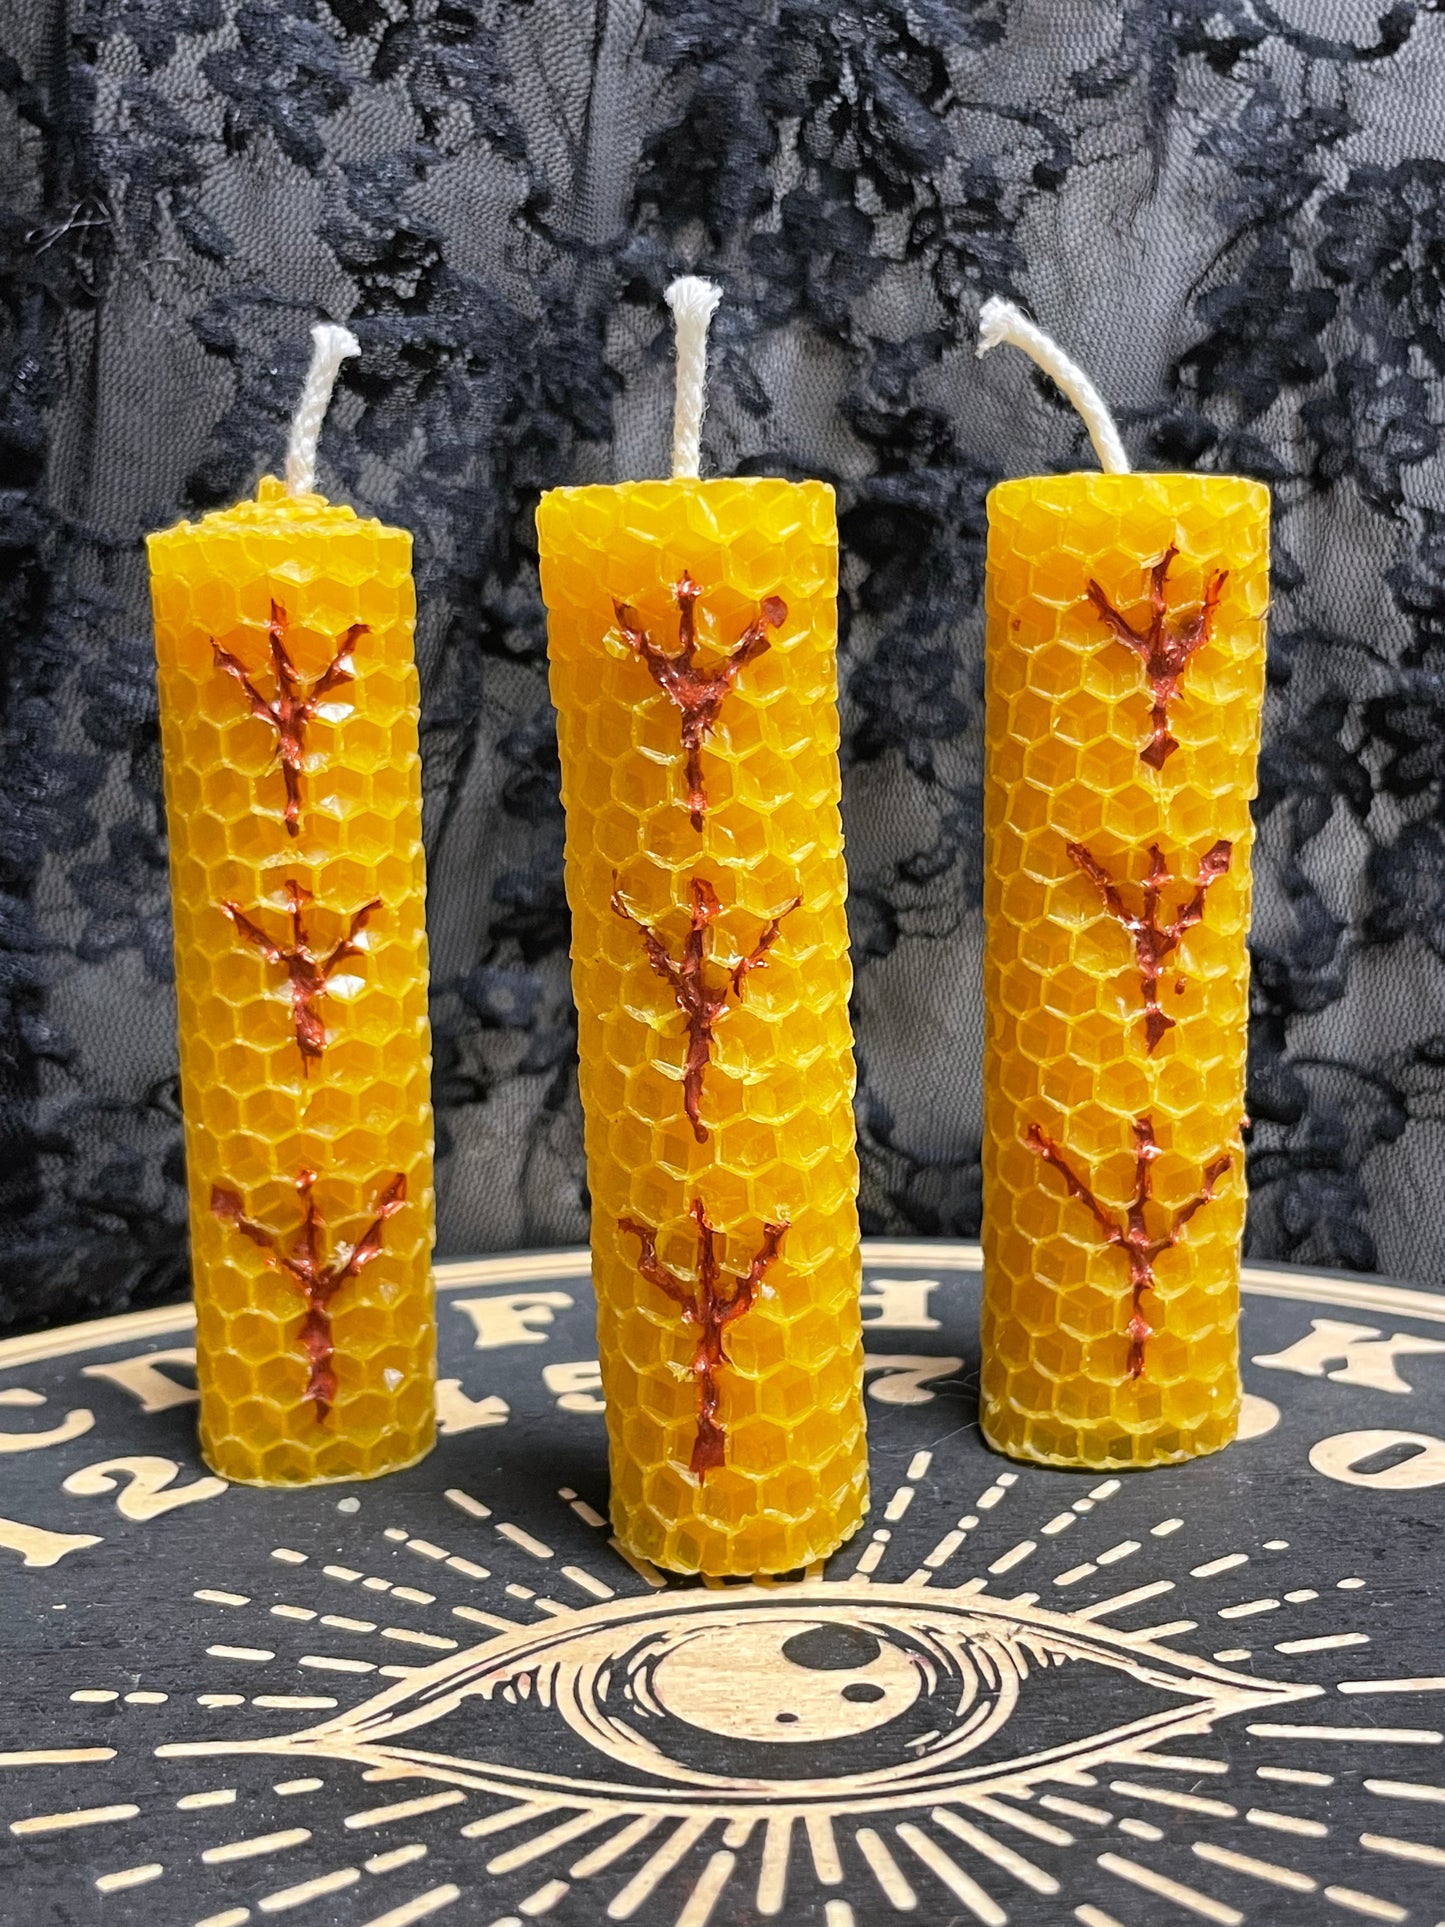 Protection Rune Beeswax Pillar Candle, 6 inch, Rolled Beeswax, Carved and Painted Candle